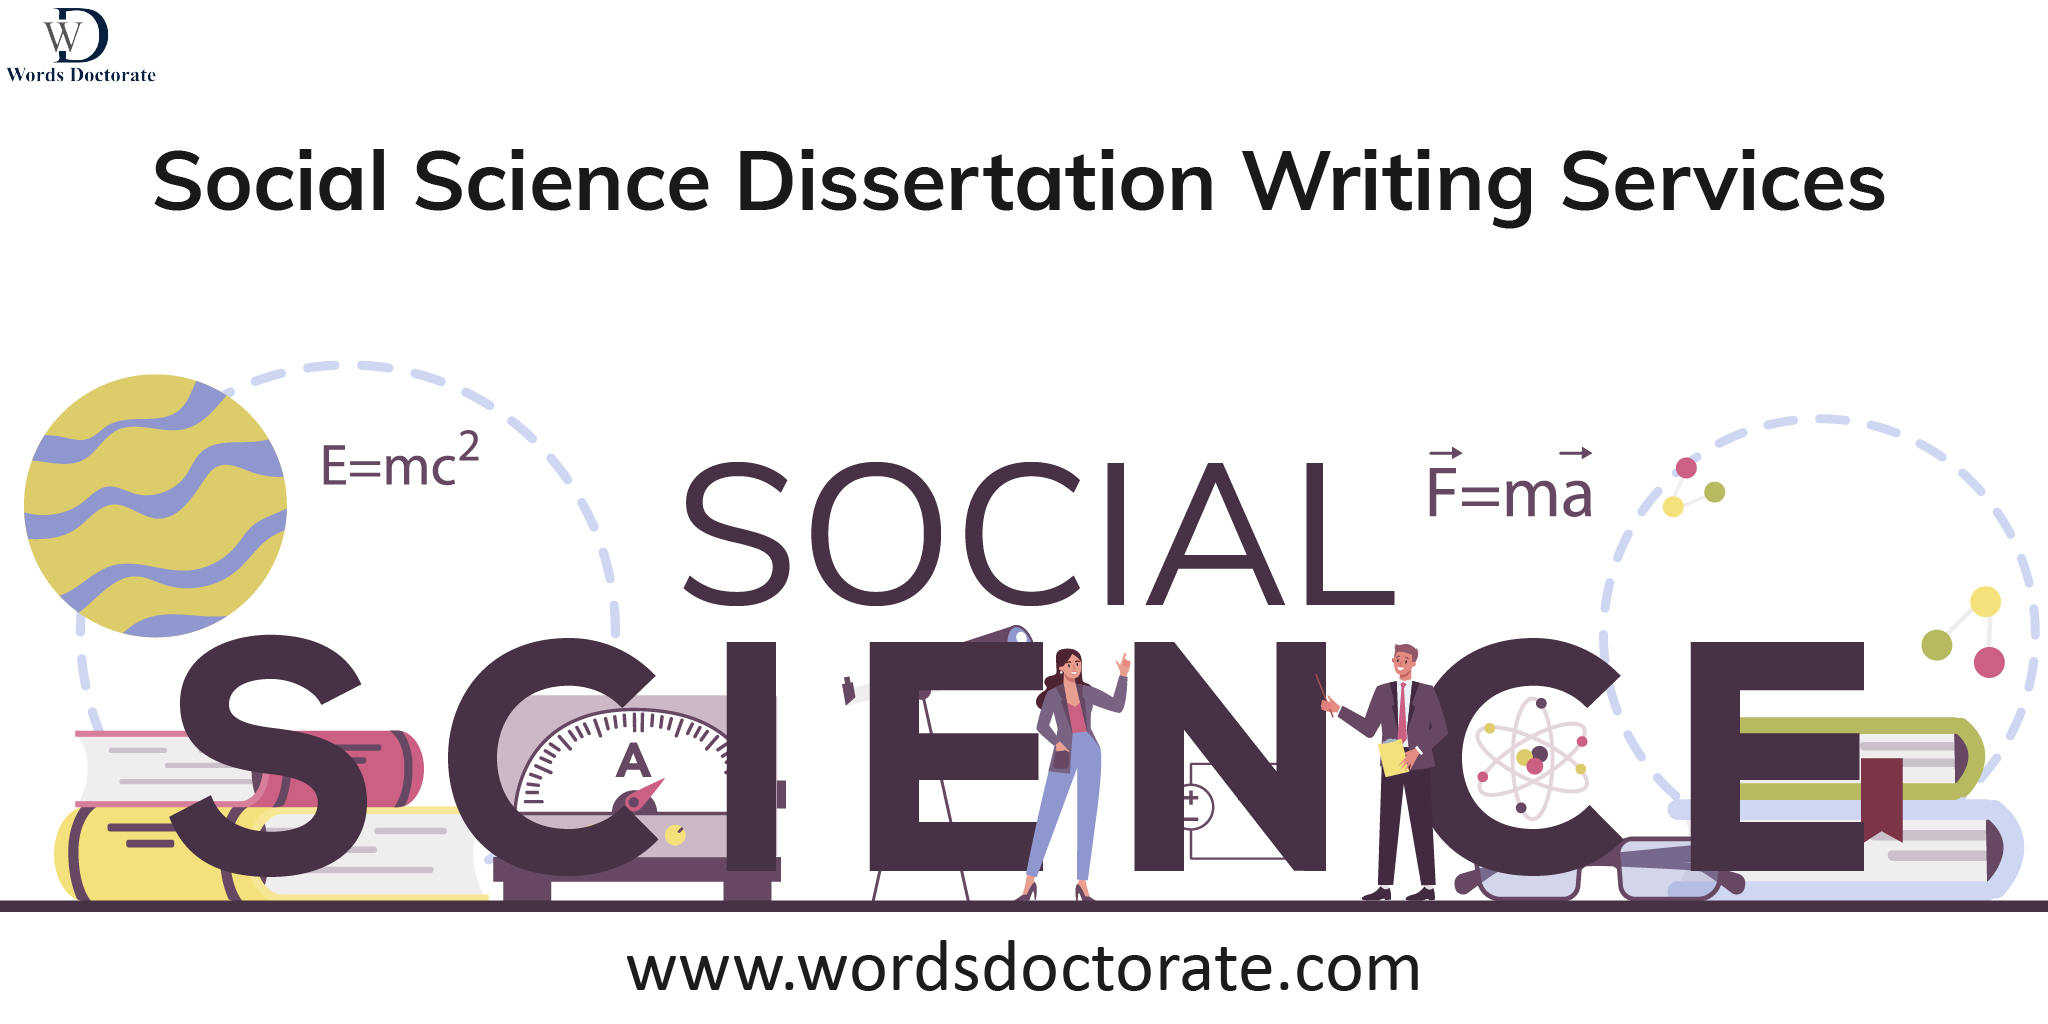 Social Science Dissertation Writing Services